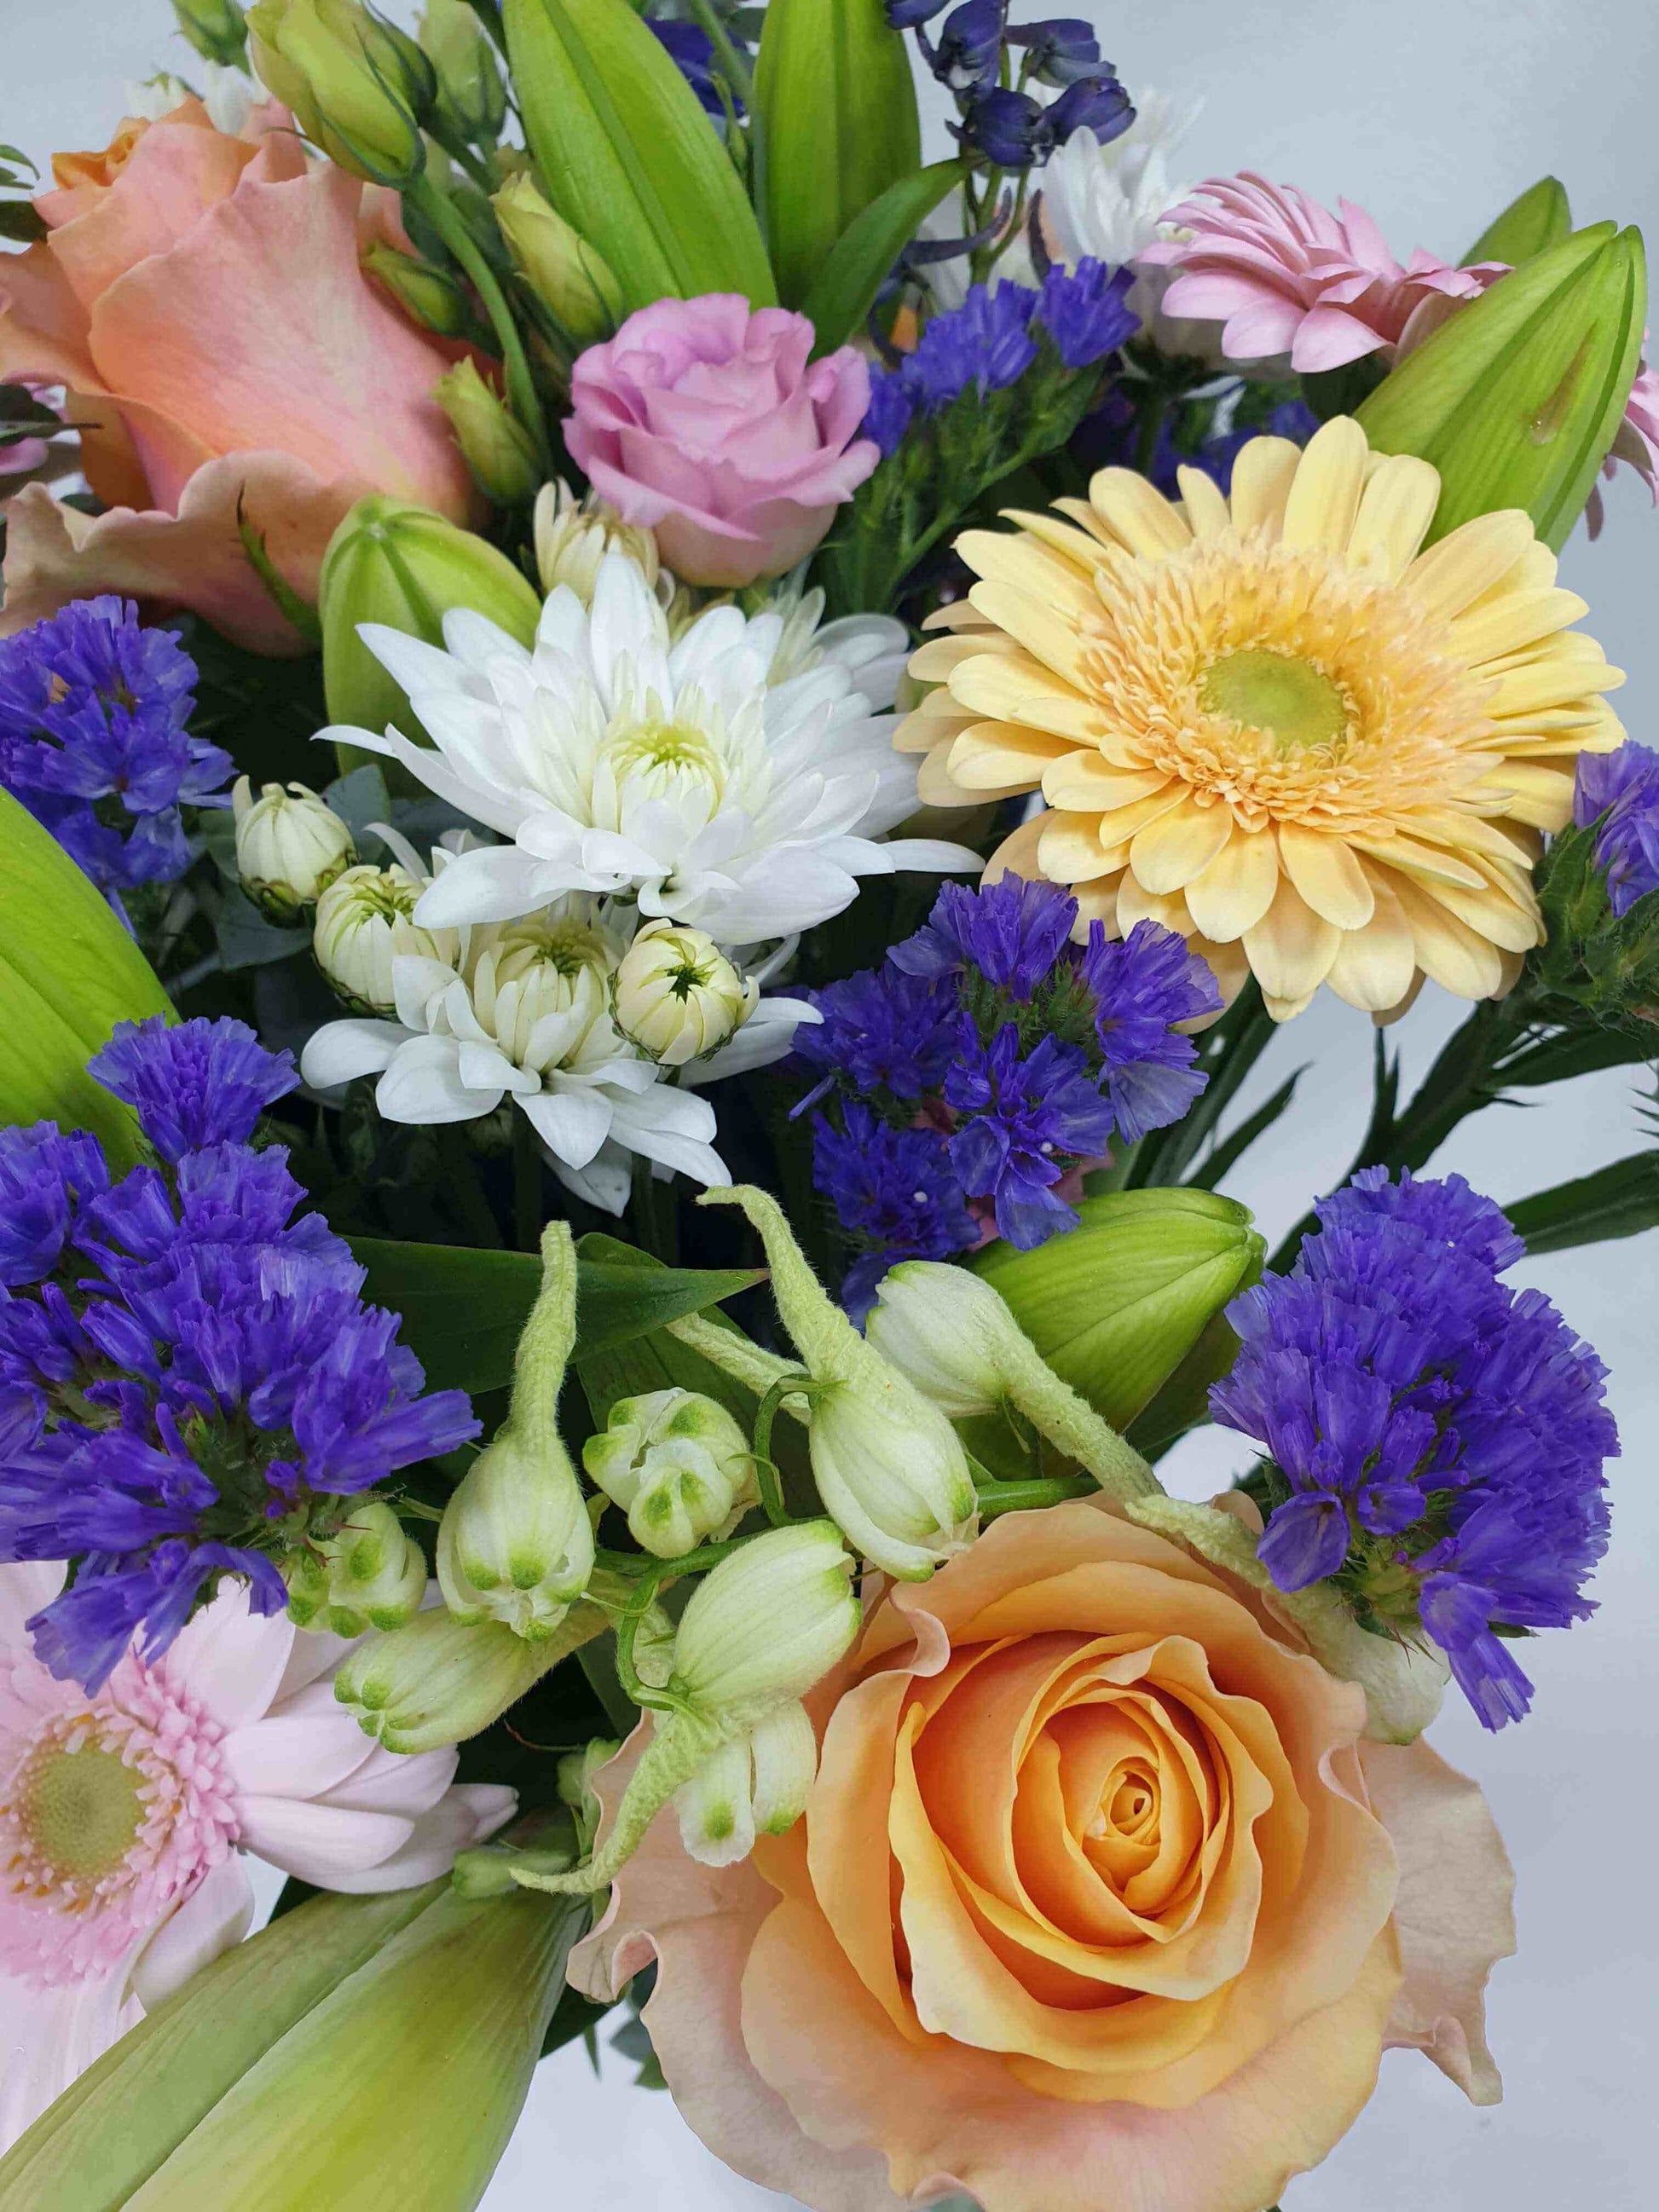 A close up of pink, purple, orange, yellow, white, and green flowers